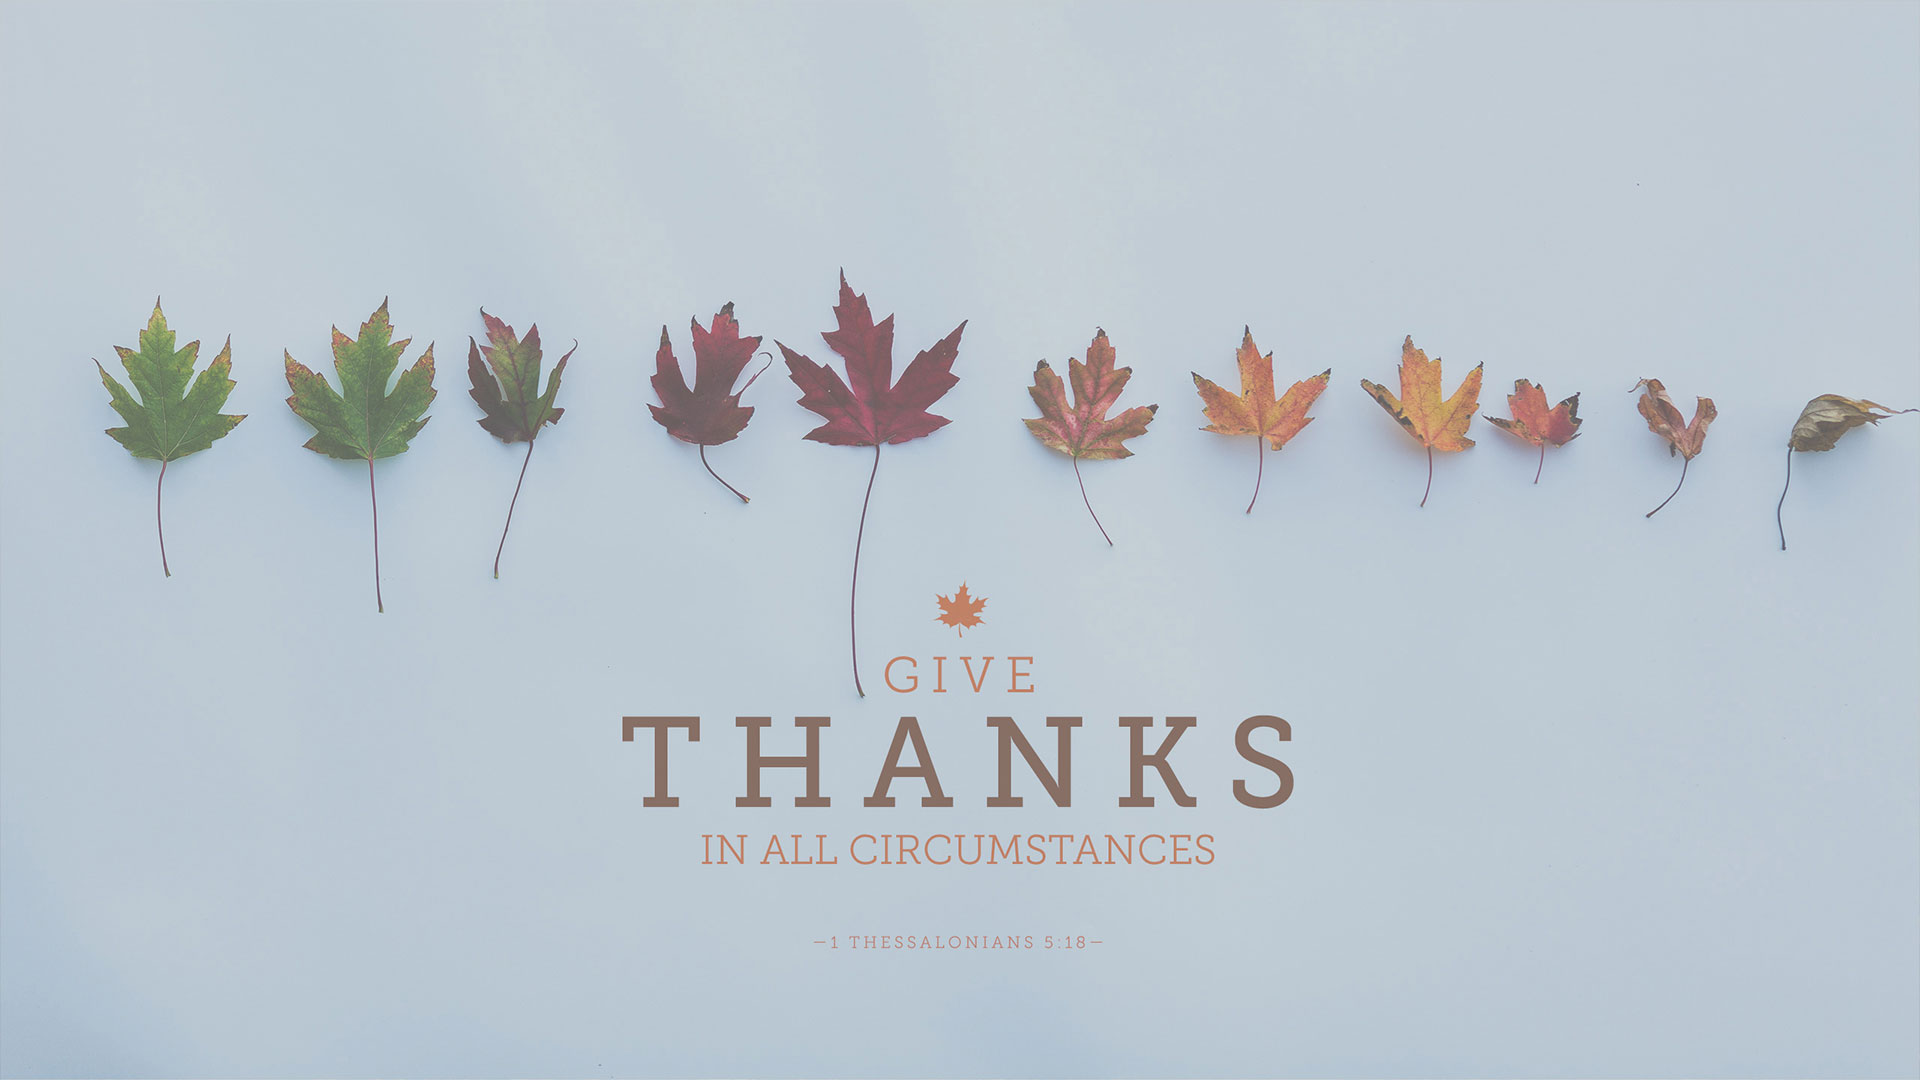 Wednesday Wallpaper: Give Thanks in All Circumstances - Jacob Abshire